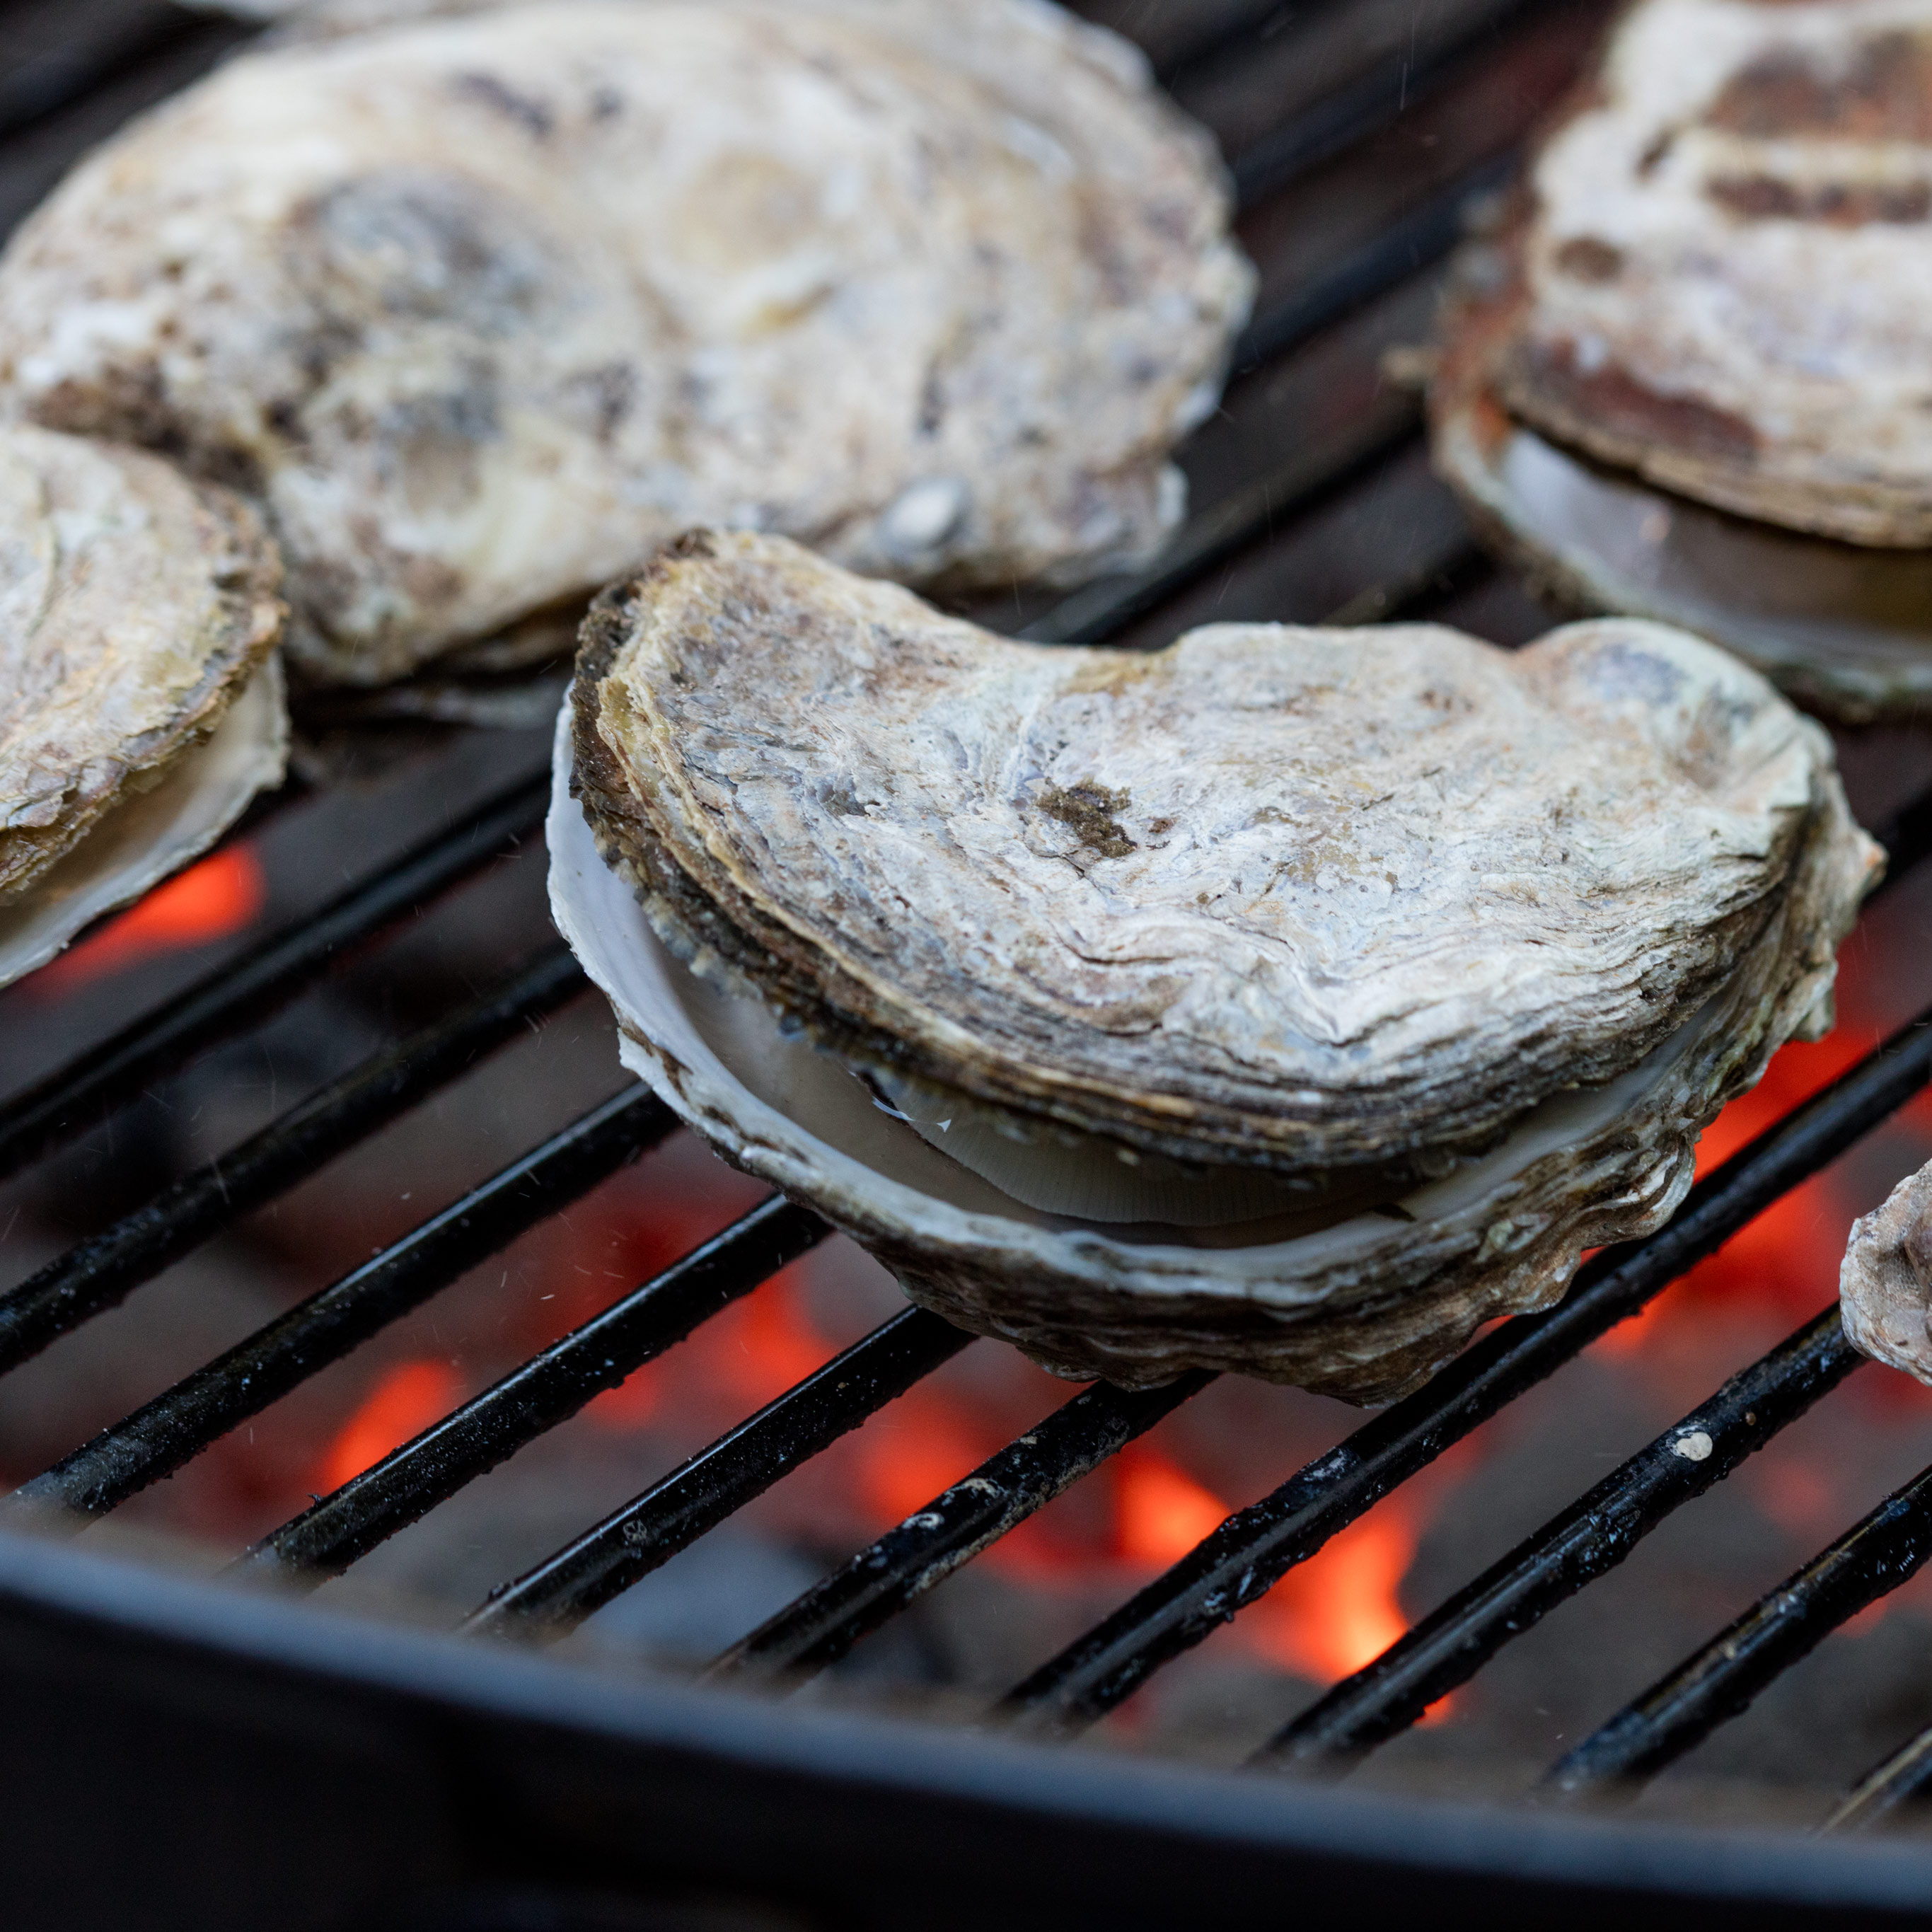 Grilled oysters : r/castiron